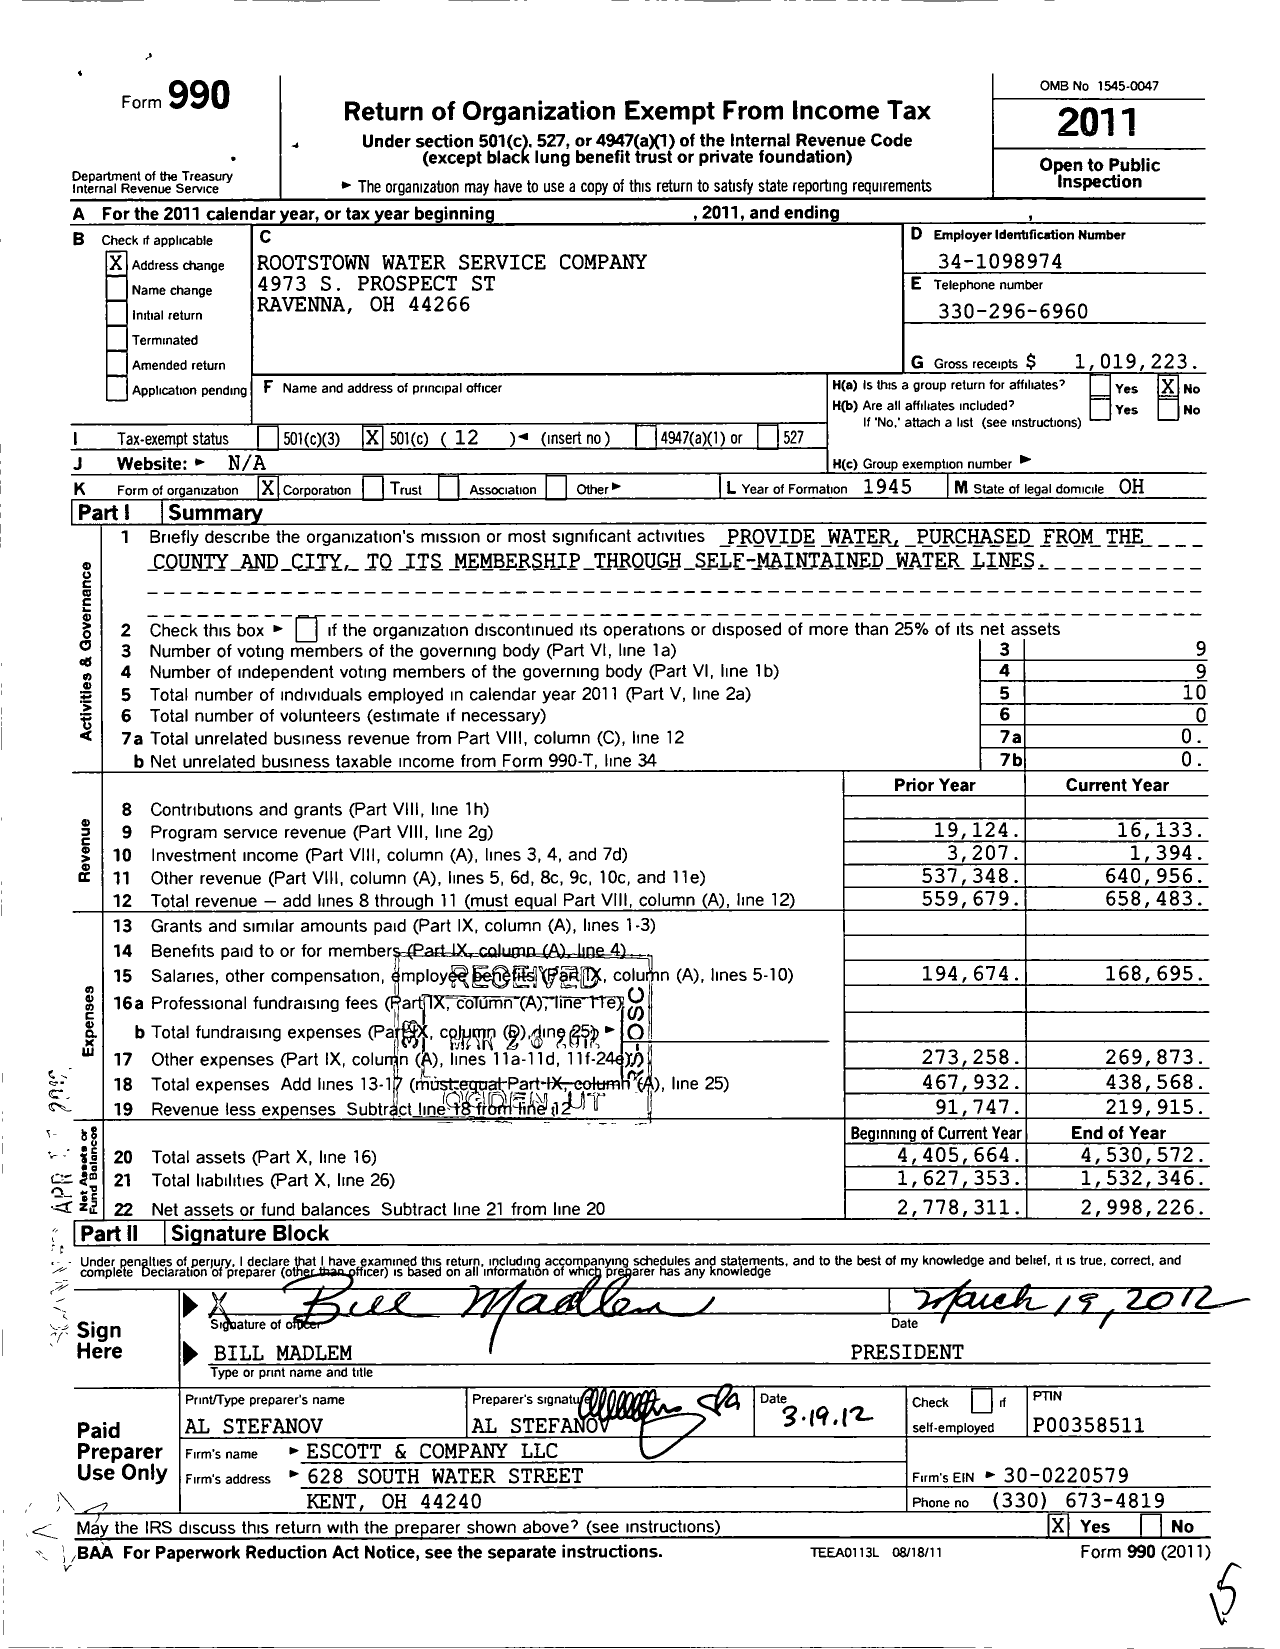 Image of first page of 2011 Form 990O for Rootstown Water Service Company